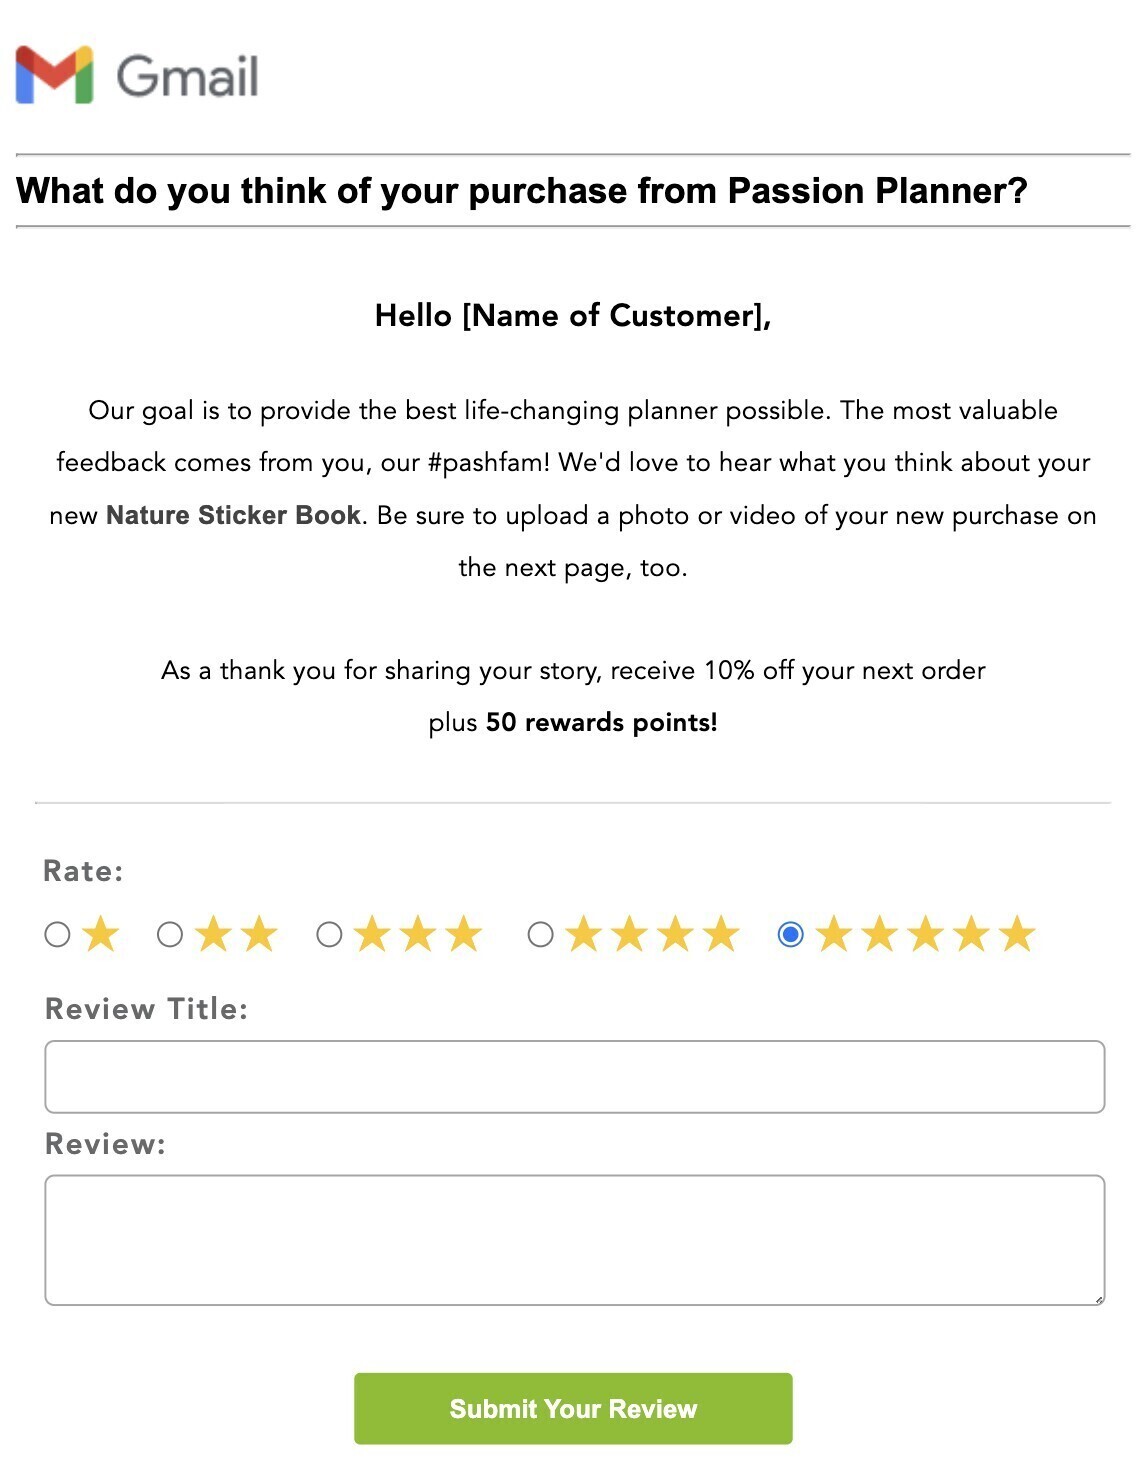 P،ion Planner email review form